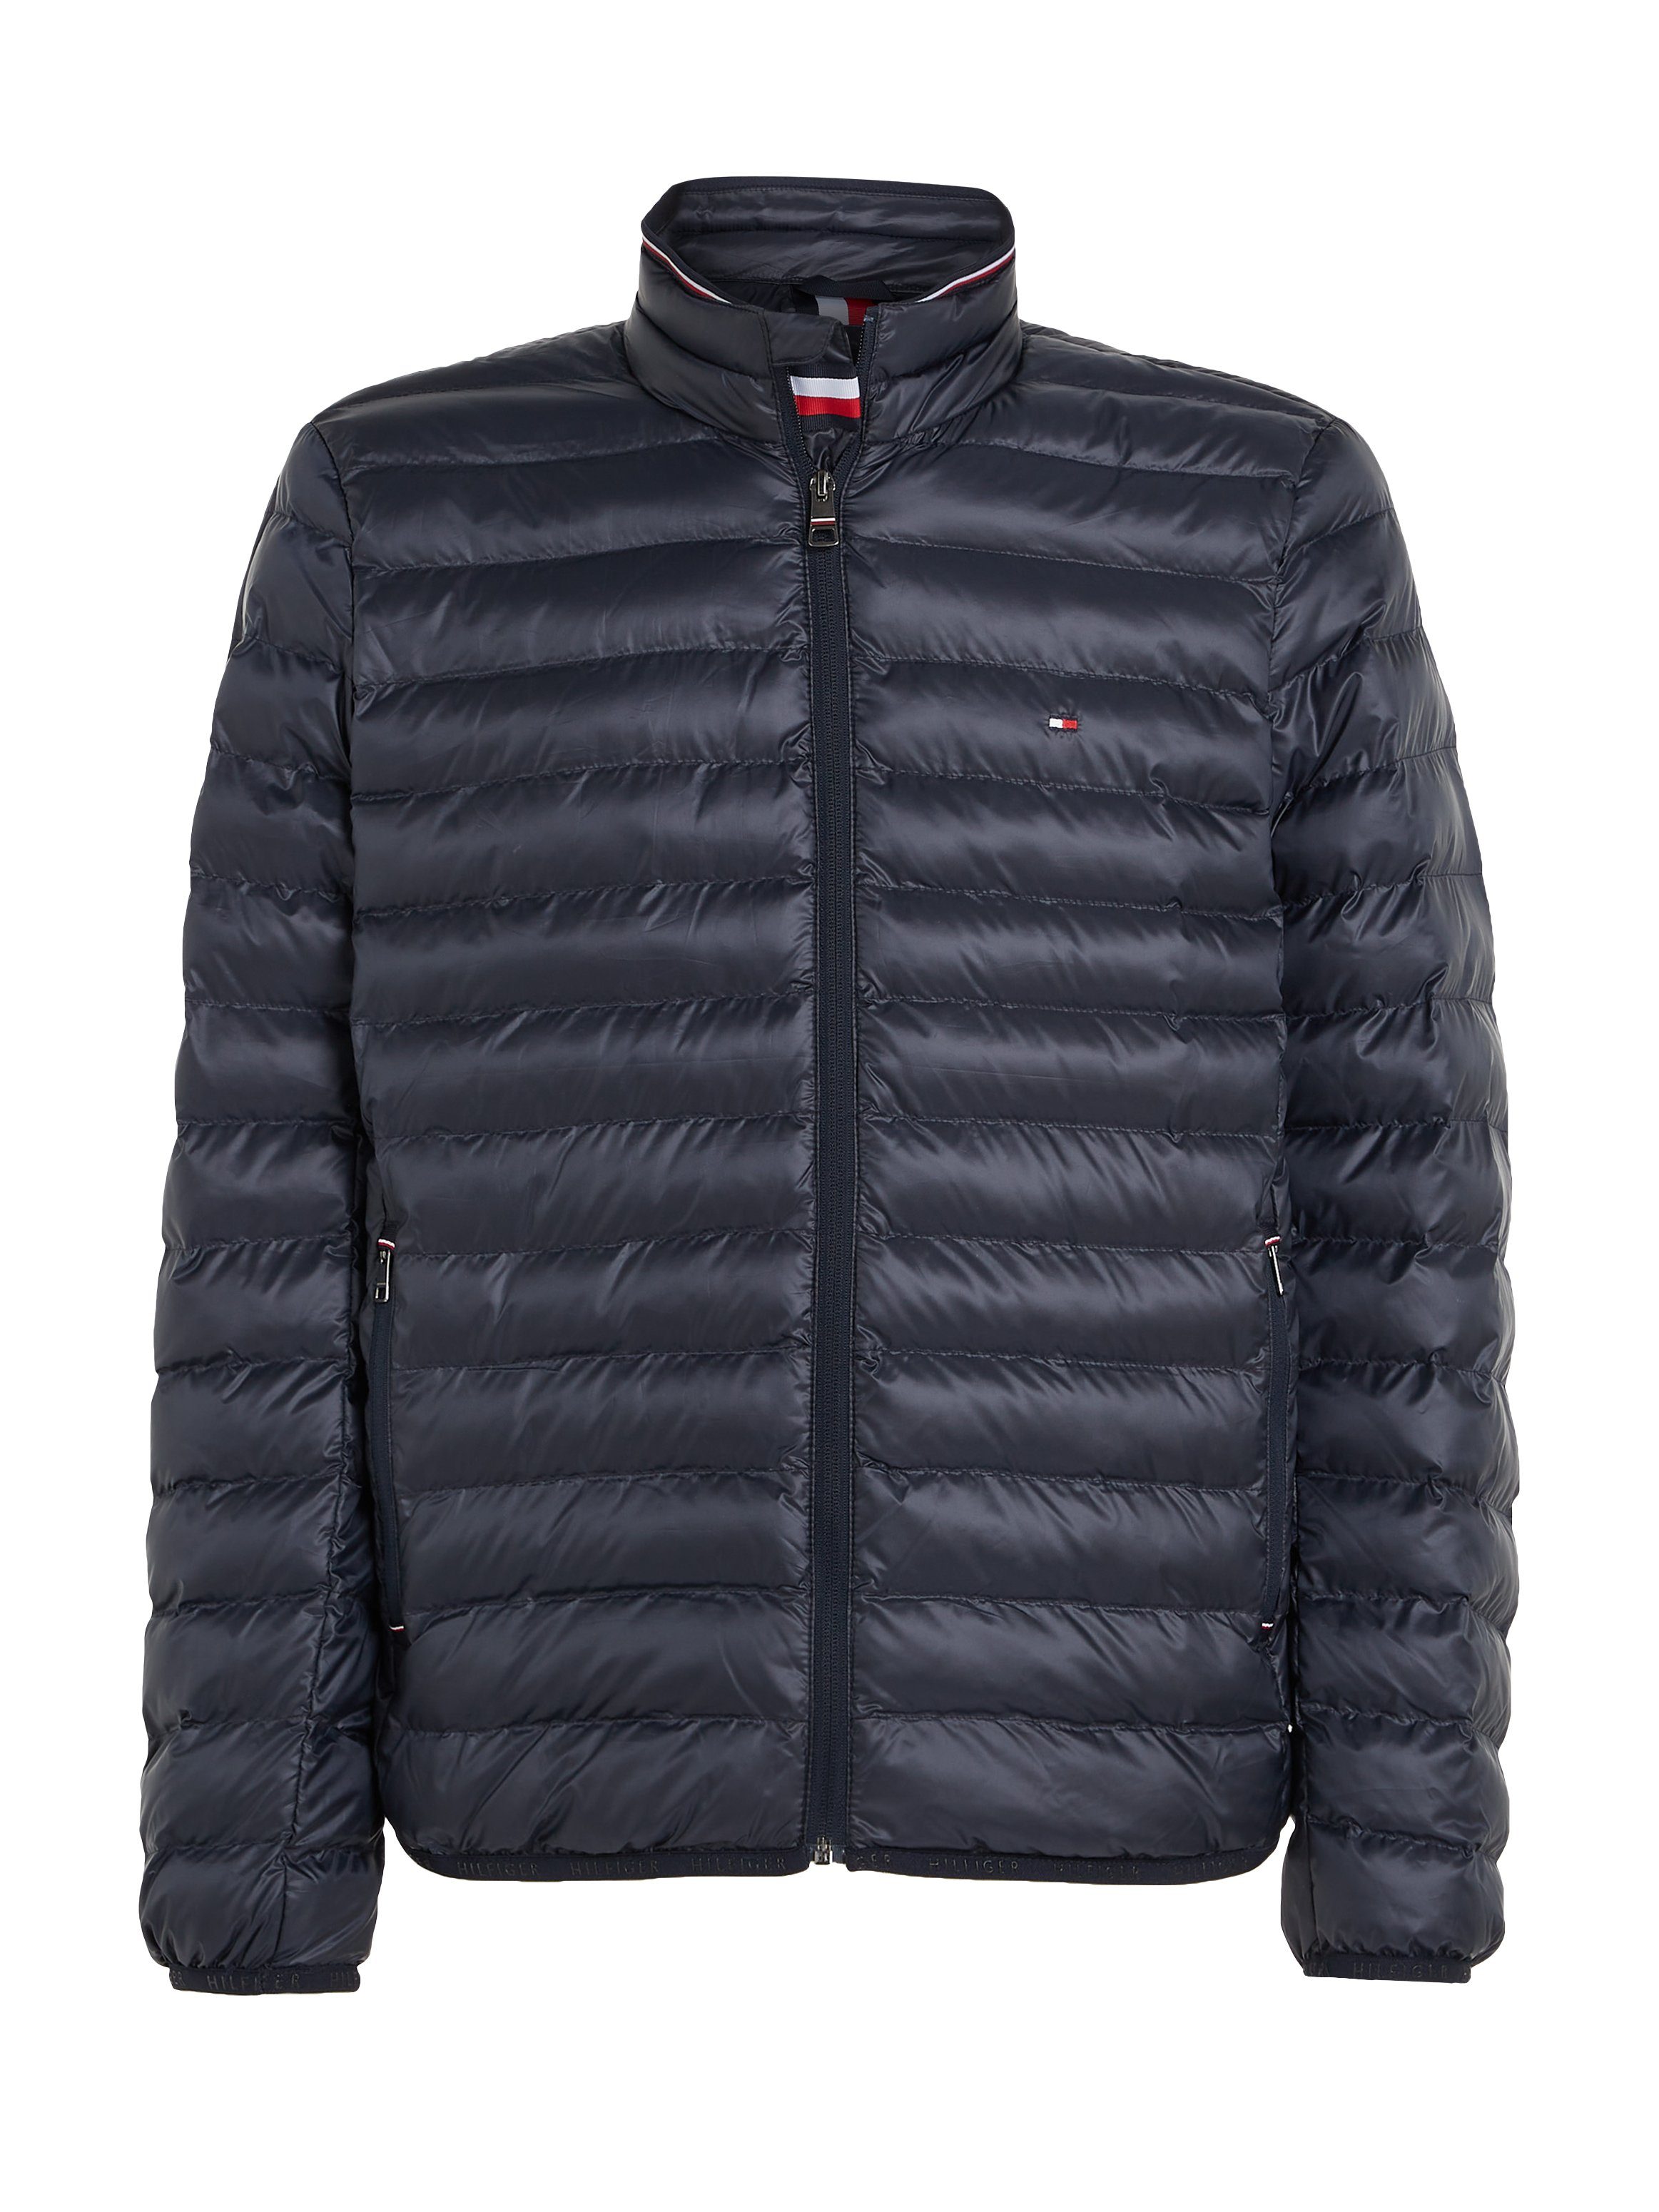 PACKABLE Hilfiger Tommy JACKET desert CORE RECYCLED Steppjacke sky